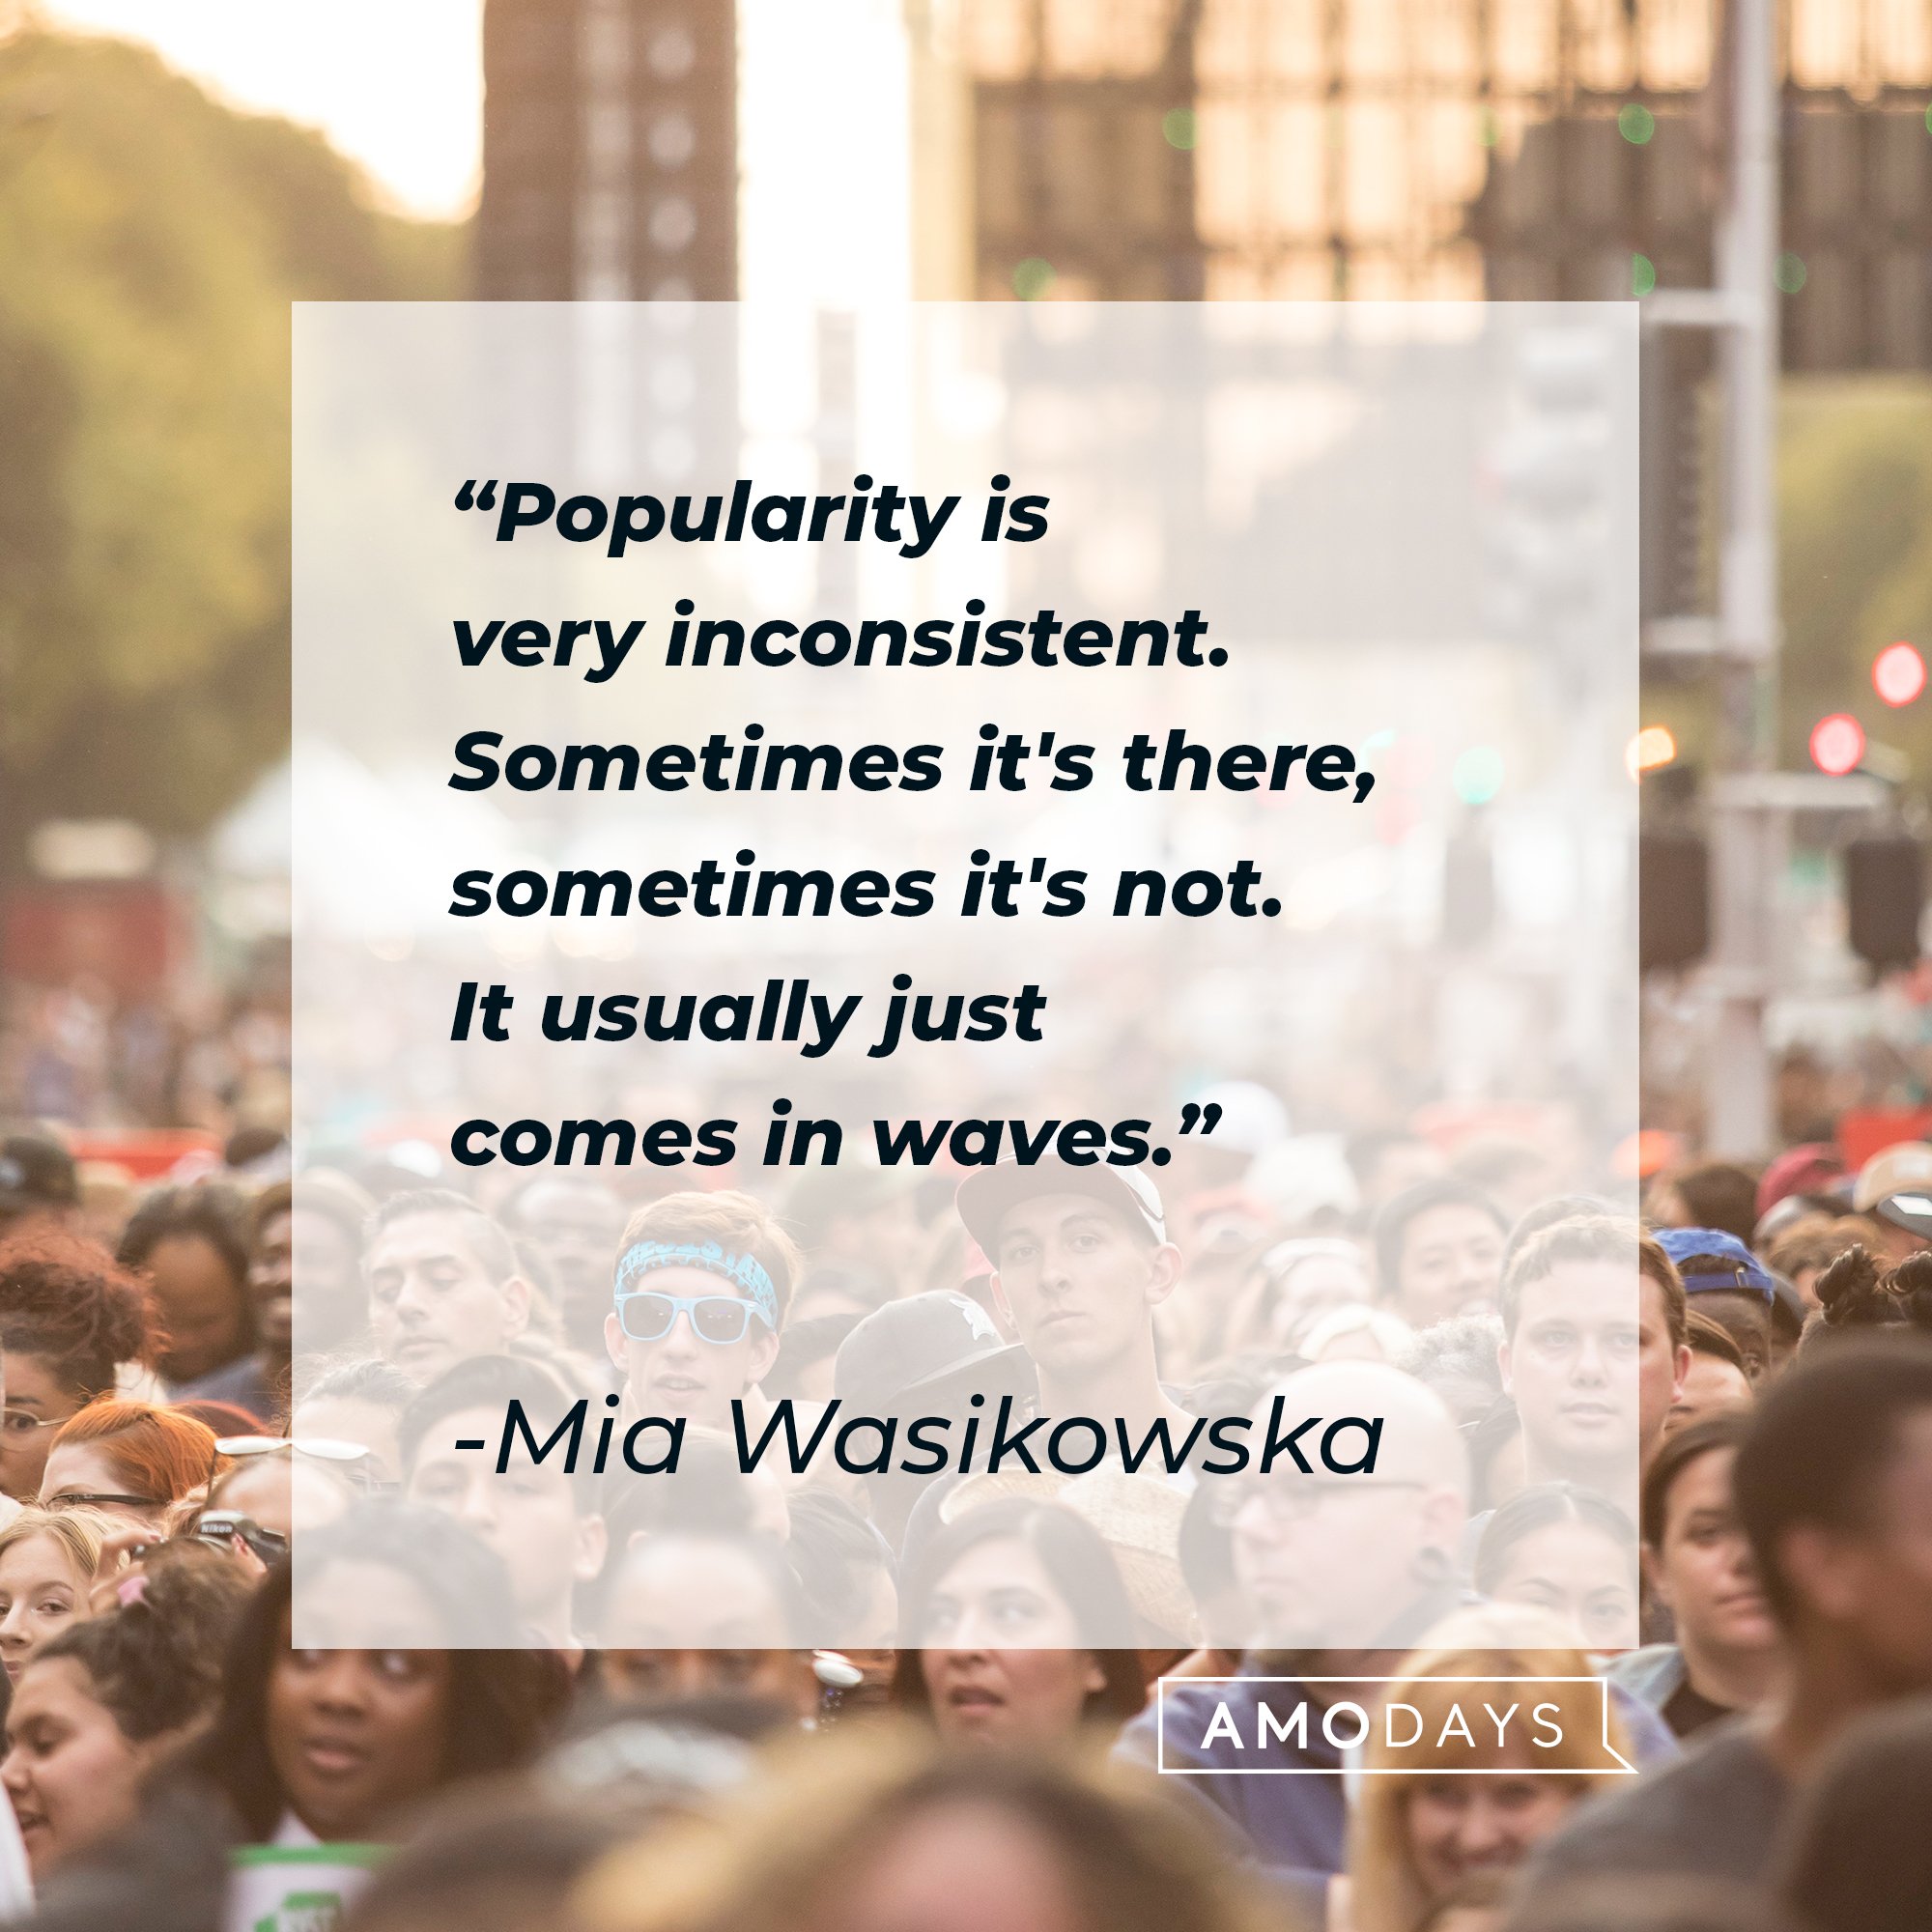 Mia Wasikowska’s quote: "Popularity is very inconsistent. Sometimes it's there, sometimes it's not. It usually just comes in waves." | Images: AmoDays